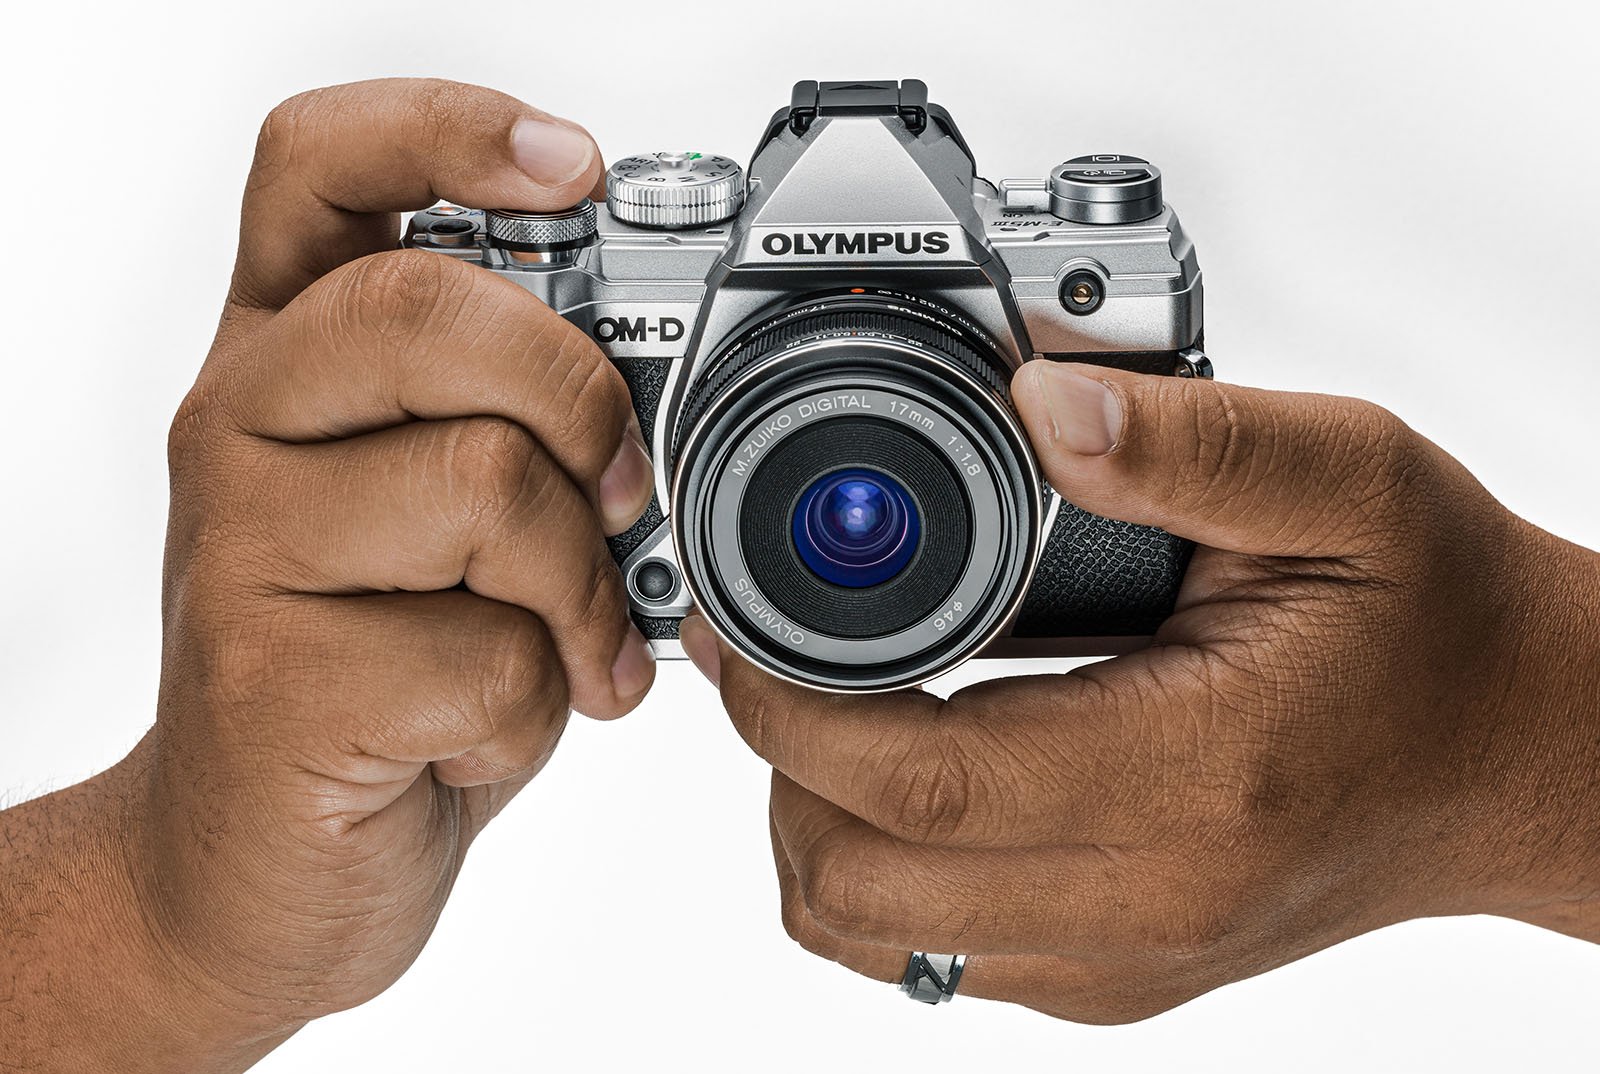 Rumor Claims Olympus will Shut Down Its Camera Division Within a Year